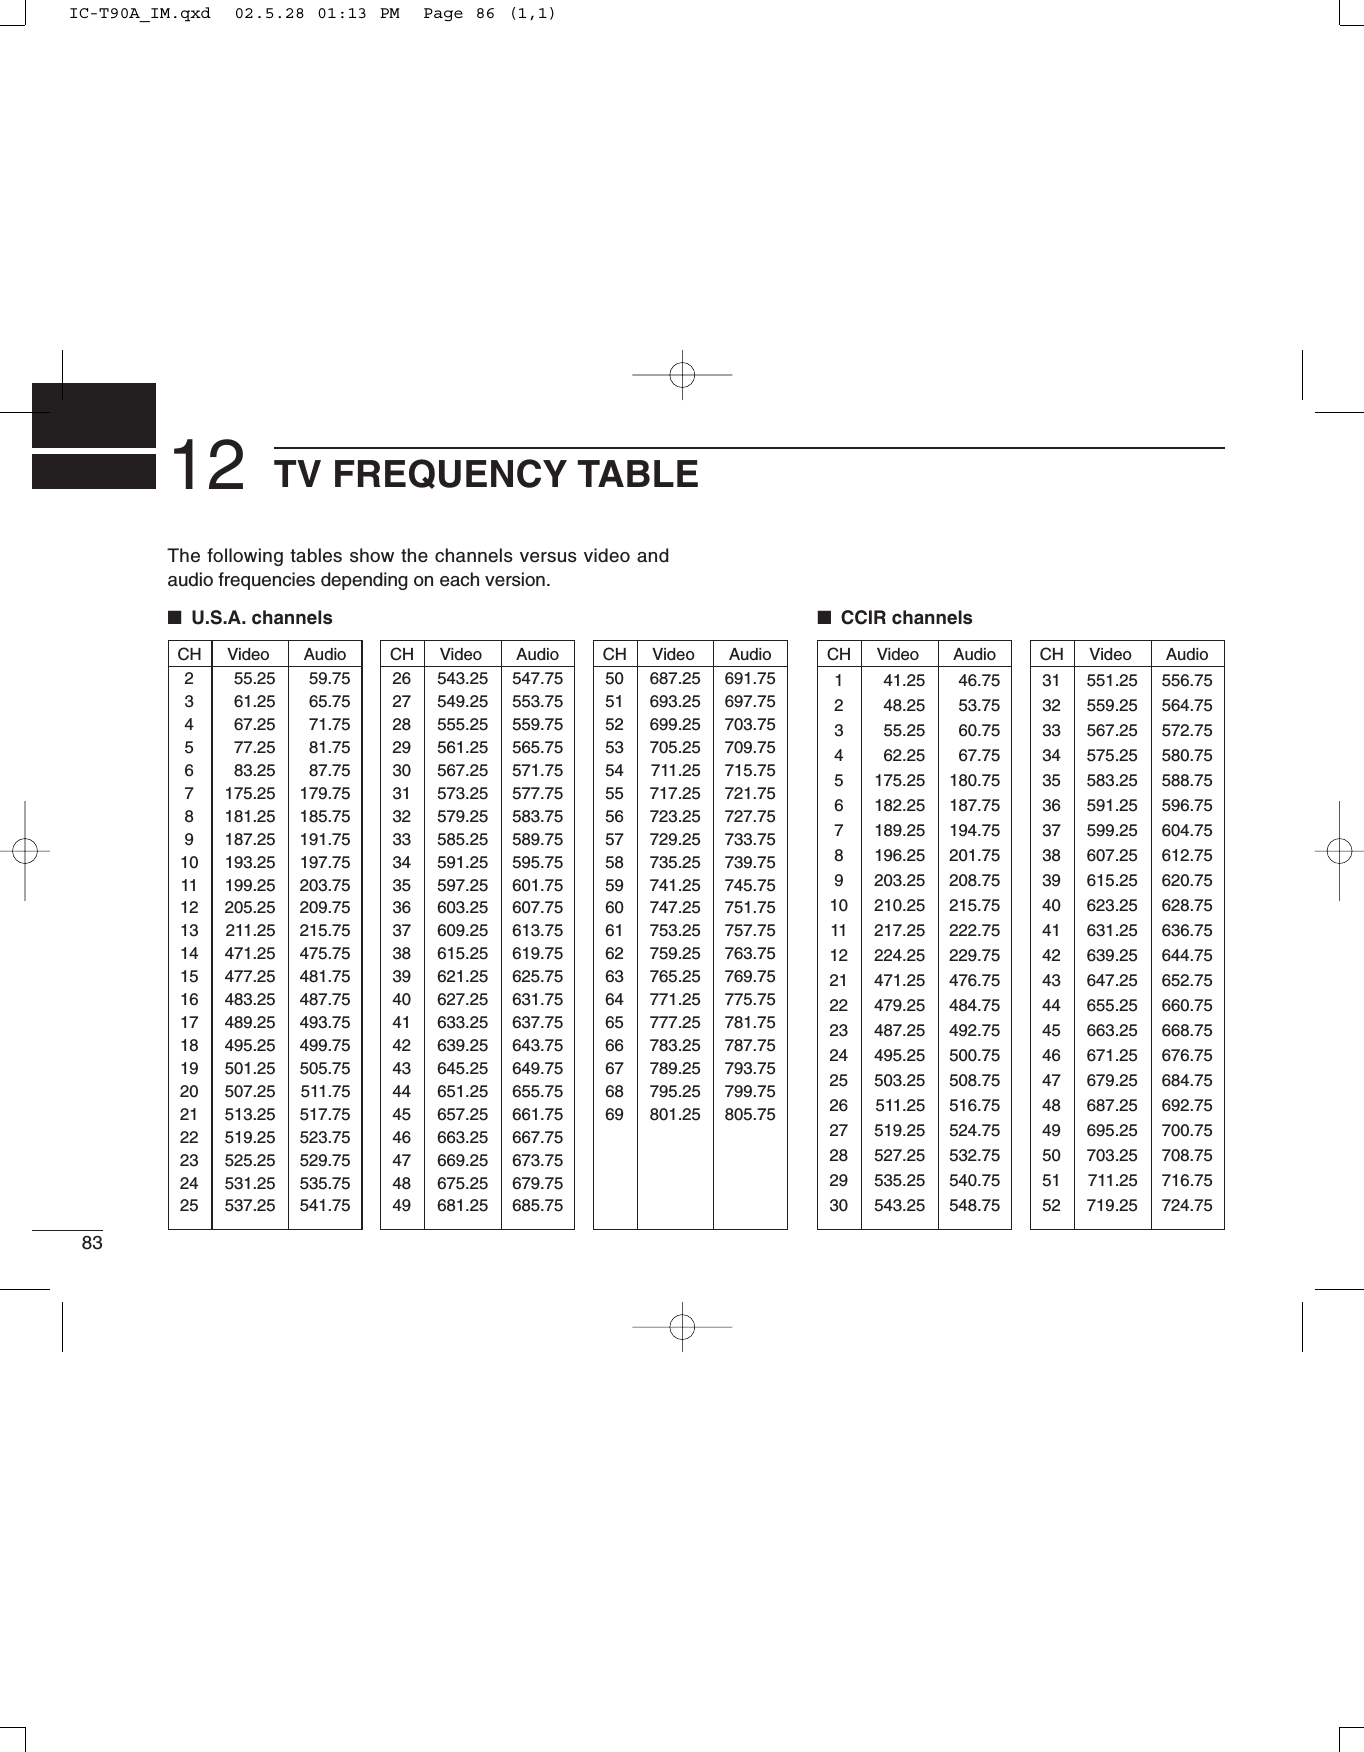 The following tables show the channels versus video andaudio frequencies depending on each version.■U.S.A. channels ■CCIR channels8312 TV FREQUENCY TABLECH Video Audio2 55.25 59.753 61.25 65.754 67.25 71.755 77.25 81.756 83.25 87.757 175.25 179.758 181.25 185.759 187.25 191.7510 193.25 197.7511 199.25 203.7512 205.25 209.7513 211.25 215.7514 471.25 475.7515 477.25 481.7516 483.25 487.7517 489.25 493.7518 495.25 499.7519 501.25 505.7520 507.25 511.7521 513.25 517.7522 519.25 523.7523 525.25 529.7524 531.25 535.7525 537.25 541.75CH Video Audio26 543.25 547.7527 549.25 553.7528 555.25 559.7529 561.25 565.7530 567.25 571.7531 573.25 577.7532 579.25 583.7533 585.25 589.7534 591.25 595.7535 597.25 601.7536 603.25 607.7537 609.25 613.7538 615.25 619.7539 621.25 625.7540 627.25 631.7541 633.25 637.7542 639.25 643.7543 645.25 649.7544 651.25 655.7545 657.25 661.7546 663.25 667.7547 669.25 673.7548 675.25 679.7549 681.25 685.75CH Video Audio50 687.25 691.7551 693.25 697.7552 699.25 703.7553 705.25 709.7554 711.25 715.7555 717.25 721.7556 723.25 727.7557 729.25 733.7558 735.25 739.7559 741.25 745.7560 747.25 751.7561 753.25 757.7562 759.25 763.7563 765.25 769.7564 771.25 775.7565 777.25 781.7566 783.25 787.7567 789.25 793.7568 795.25 799.7569 801.25 805.75CH Video Audio1 41.25 46.752 48.25 53.753 55.25 60.754 62.25 67.755 175.25 180.756 182.25 187.757 189.25 194.758 196.25 201.759 203.25 208.7510 210.25 215.7511 217.25 222.7512 224.25 229.7521 471.25 476.7522 479.25 484.7523 487.25 492.7524 495.25 500.7525 503.25 508.7526 511.25 516.7527 519.25 524.7528 527.25 532.7529 535.25 540.7530 543.25 548.75CH Video Audio31 551.25 556.7532 559.25 564.7533 567.25 572.7534 575.25 580.7535 583.25 588.7536 591.25 596.7537 599.25 604.7538 607.25 612.7539 615.25 620.7540 623.25 628.7541 631.25 636.7542 639.25 644.7543 647.25 652.7544 655.25 660.7545 663.25 668.7546 671.25 676.7547 679.25 684.7548 687.25 692.7549 695.25 700.7550 703.25 708.7551 711.25 716.7552 719.25 724.75IC-T90A_IM.qxd  02.5.28 01:13 PM  Page 86 (1,1)